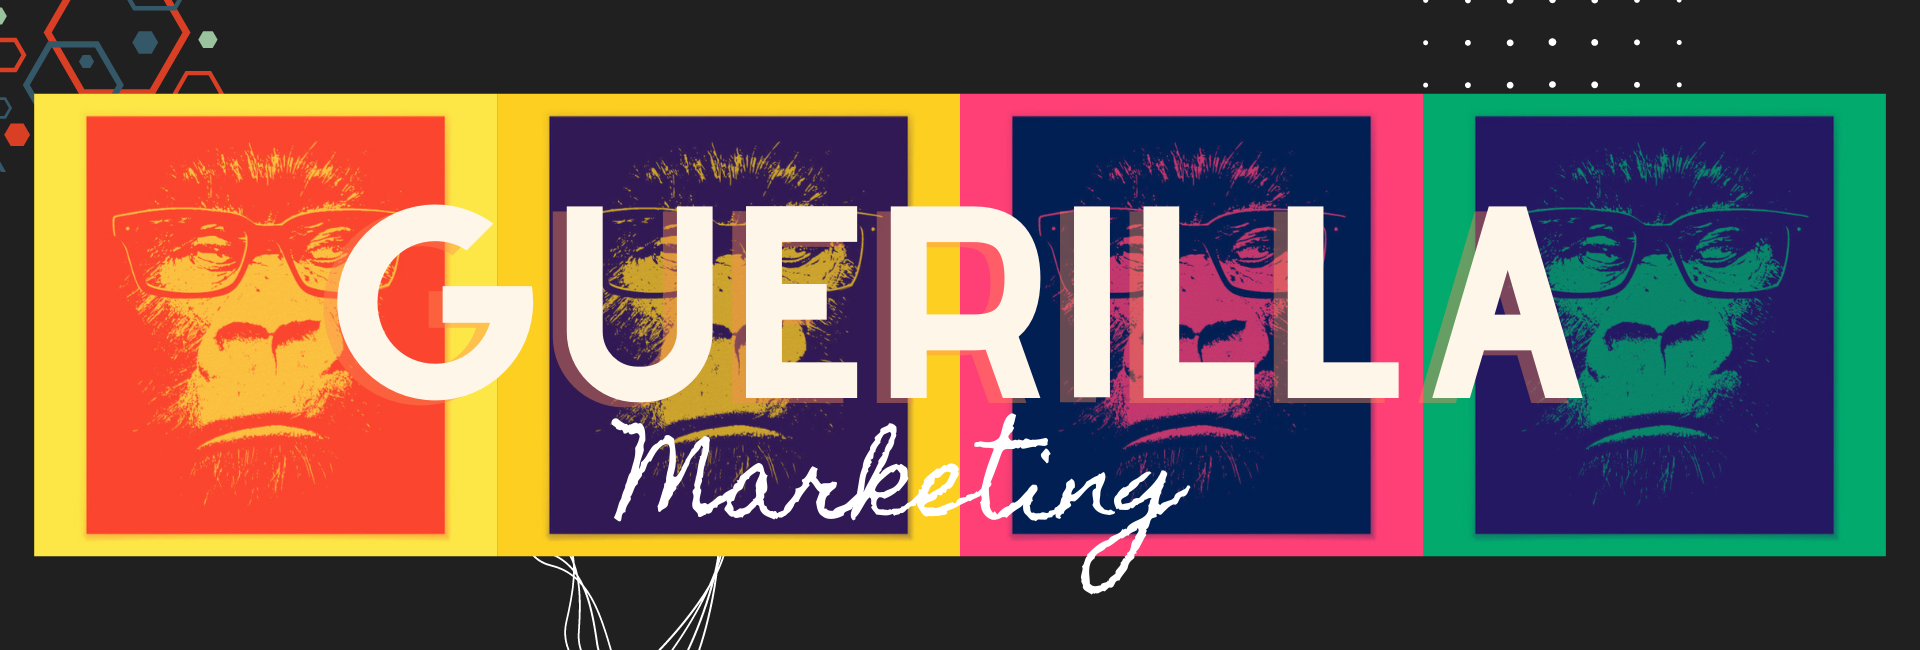 Guerilla Marketing: The Cool and Unconventional Marketing Strategy